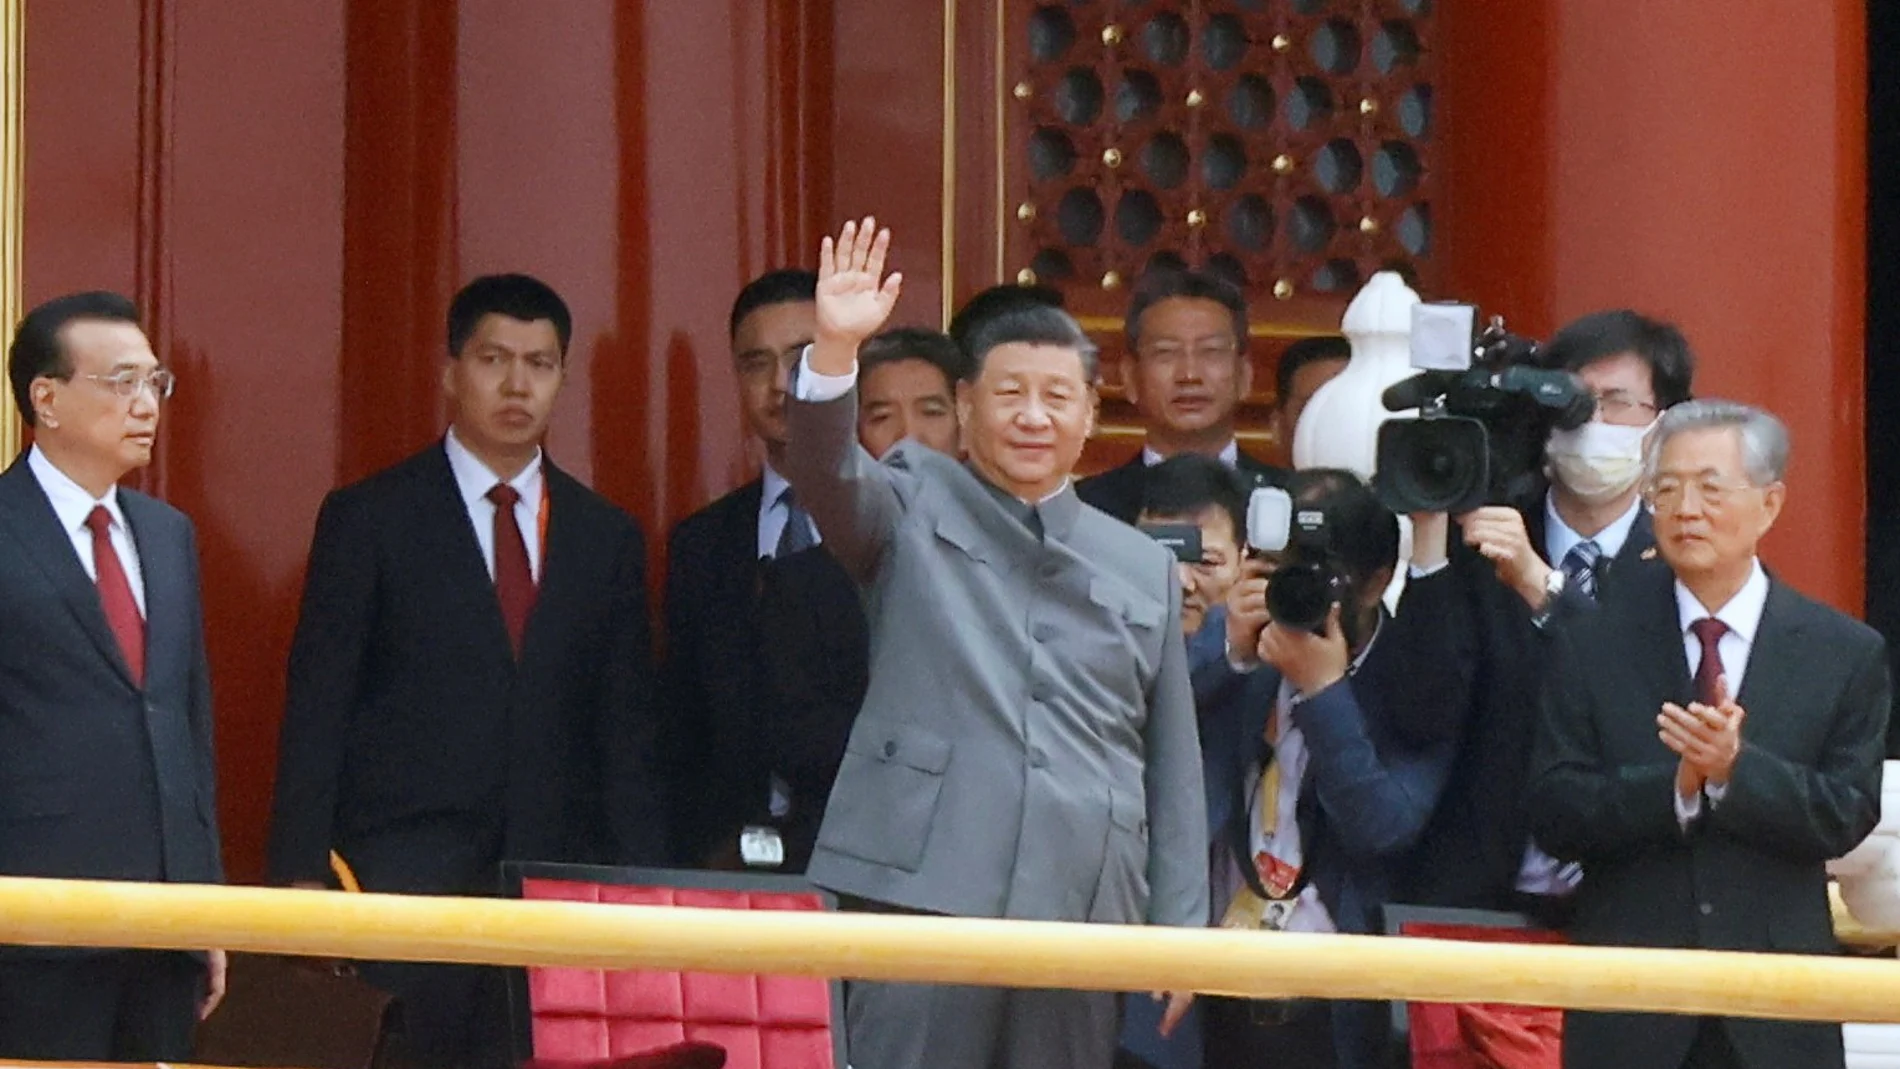 Chinese President Xi Jinping waves next to Premier Li Keqiang and former president Hu Jintao at the end of the event marking the 100th founding anniversary of the Communist Party of China, on Tiananmen Square in Beijing, China July 1, 2021. REUTERS/Carlos Garcia Rawlins TPX IMAGES OF THE DAY